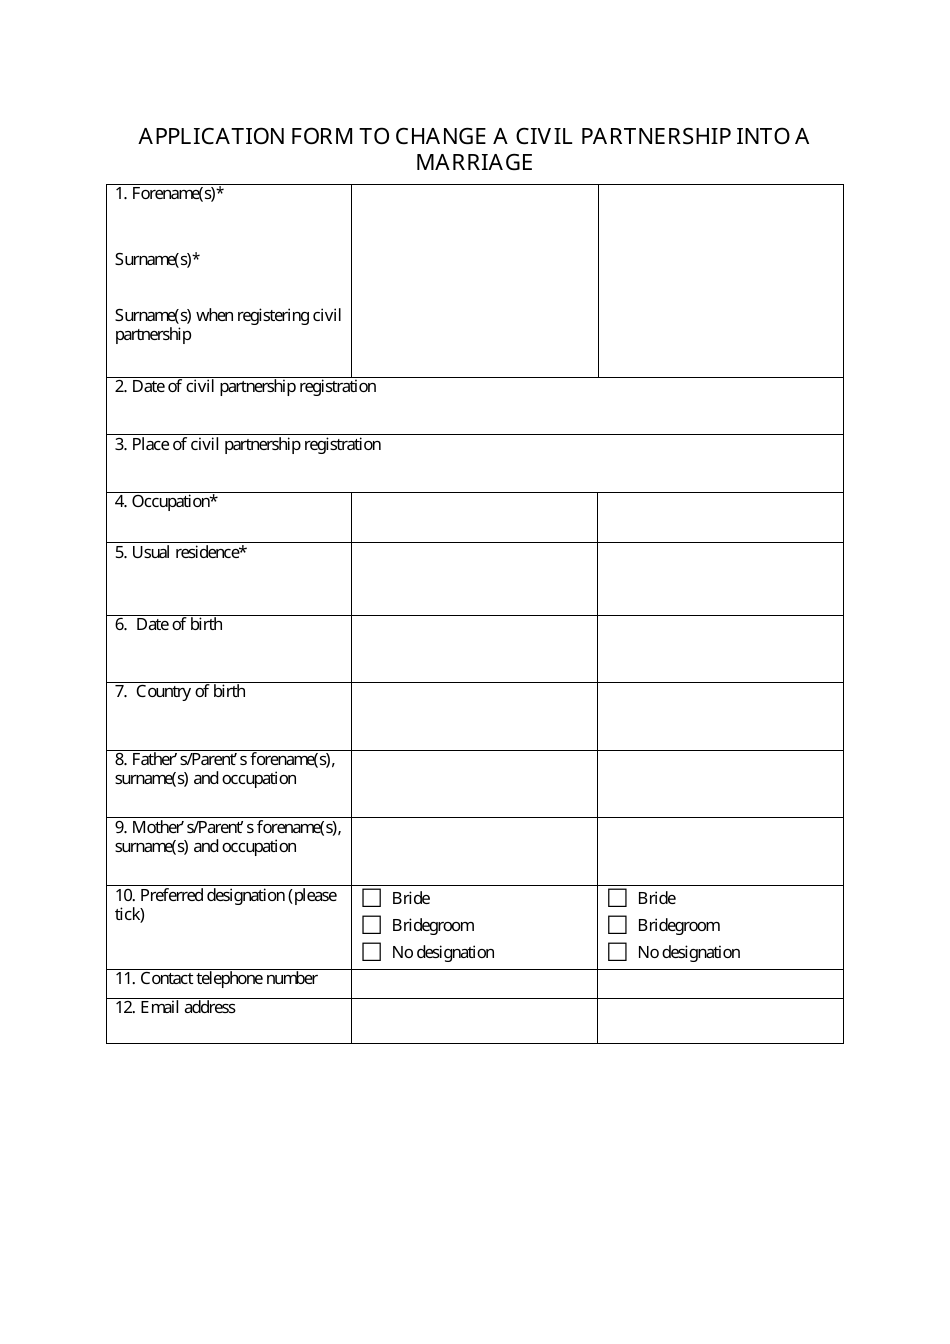 Application Form to Change a Civil Partnership Into a Marriage - United Kingdom, Page 1